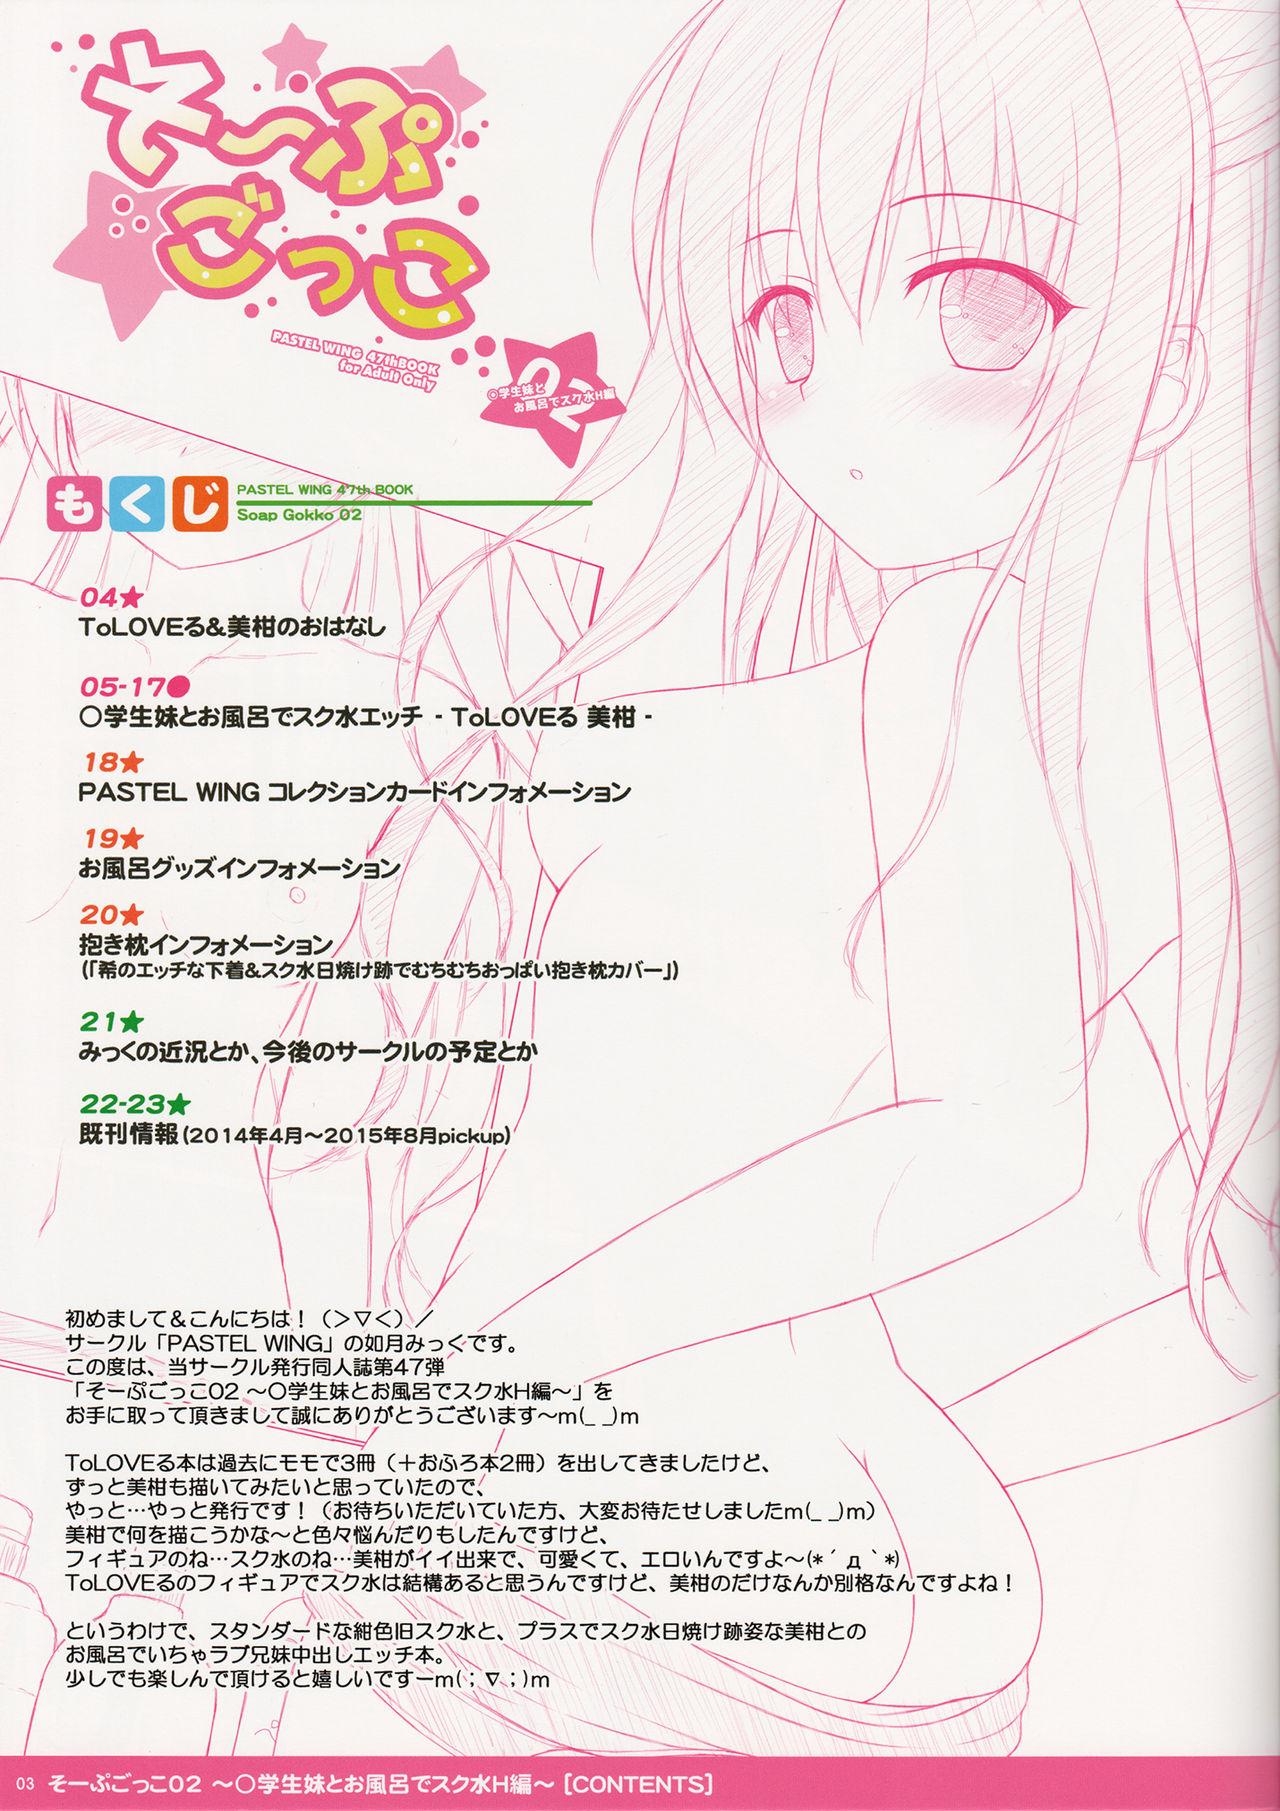 Chile Soap Gokko 02 - To love-ru First - Page 3